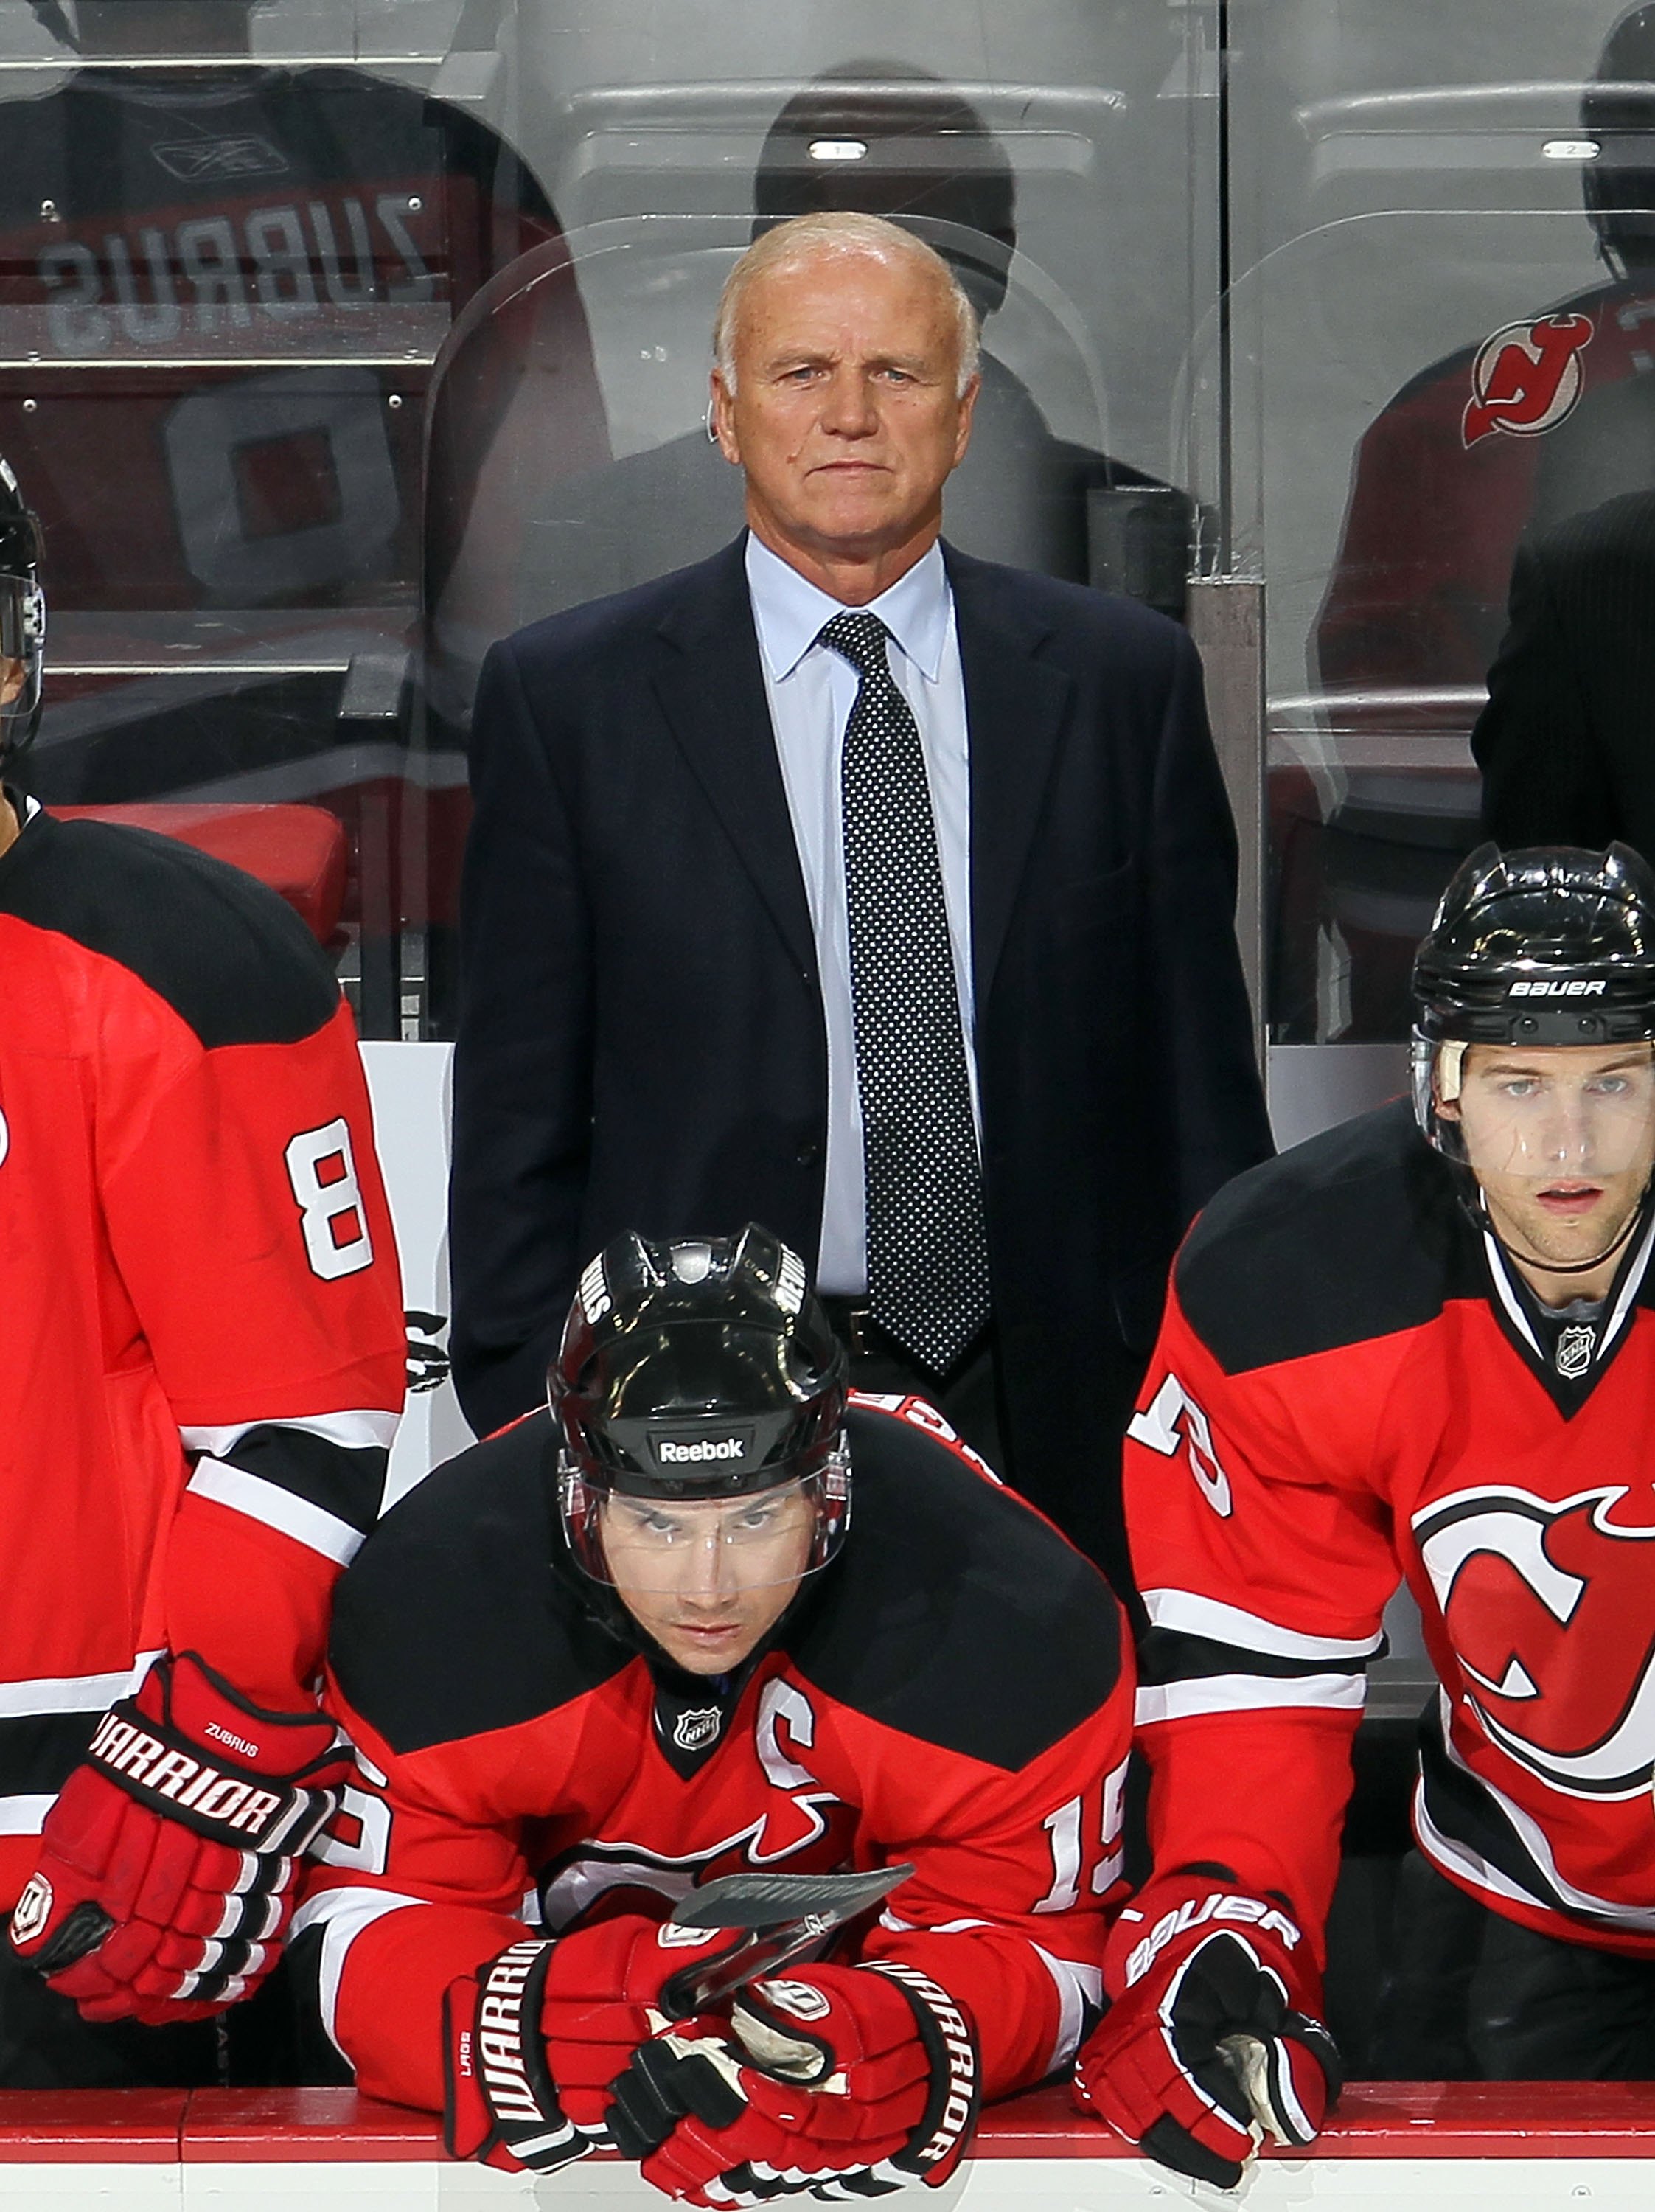 John MacLean of the New Jersey Devils coaching his first NHL game